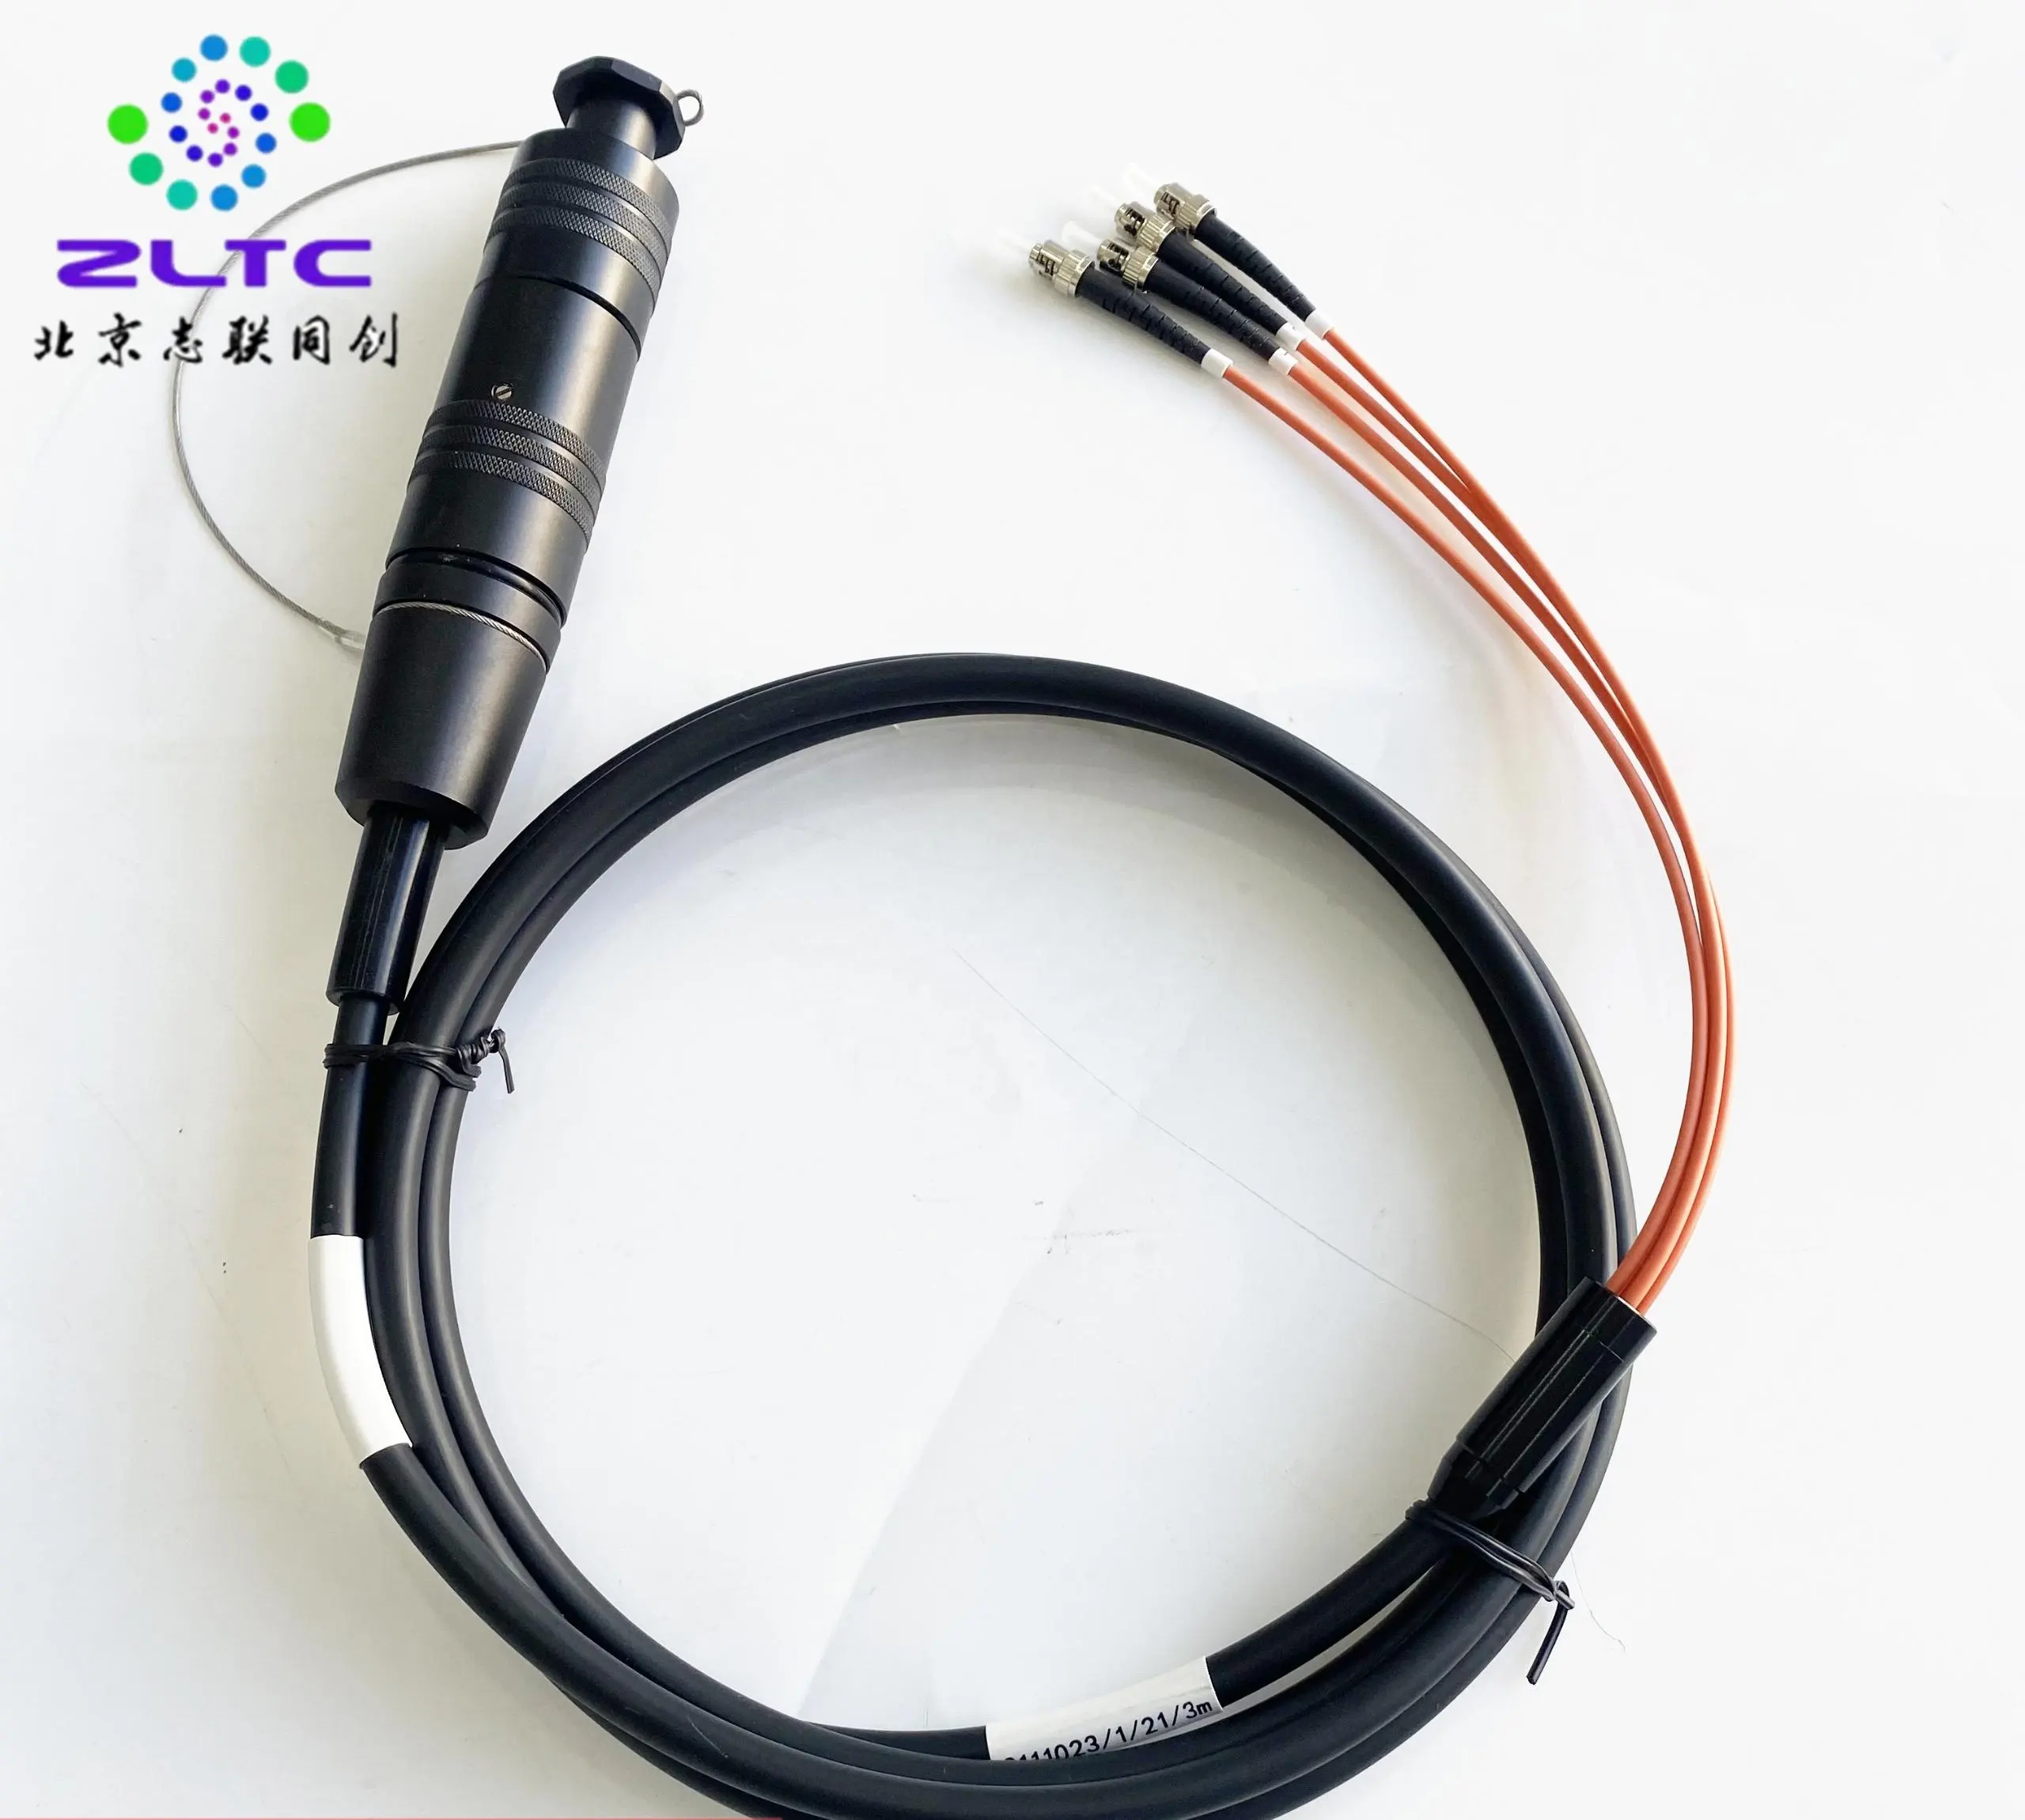 ZLTC YZG Fiber connectors fully compatible TFOCA Emergency Restoration and Deployable Communications Mining and Exploration